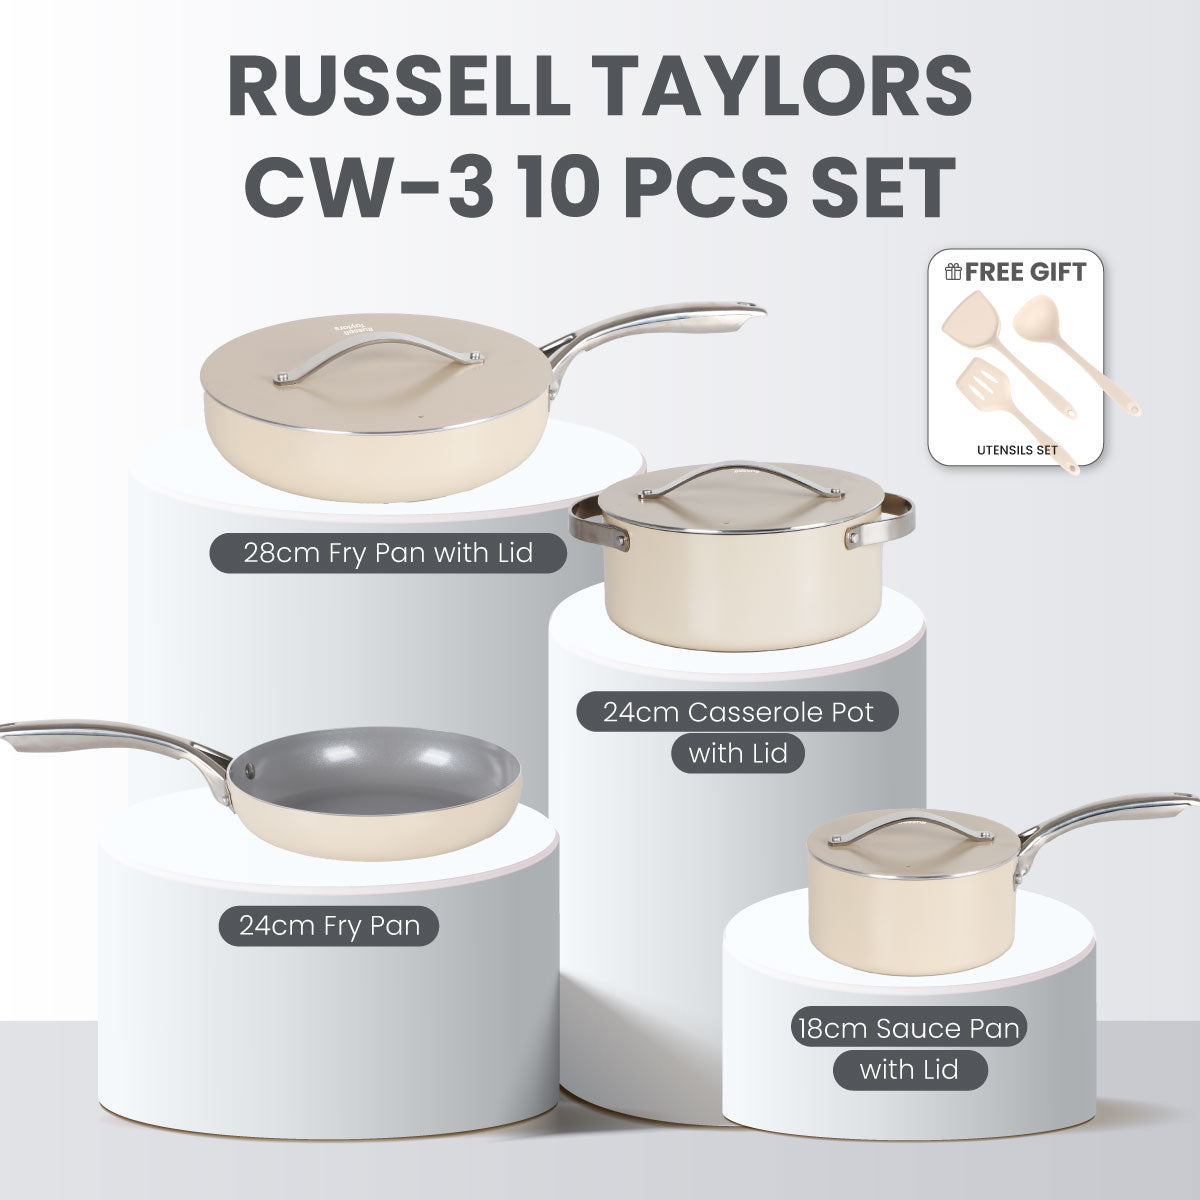 Russell Taylors Non Stick Marble Coated Casserole with Lid